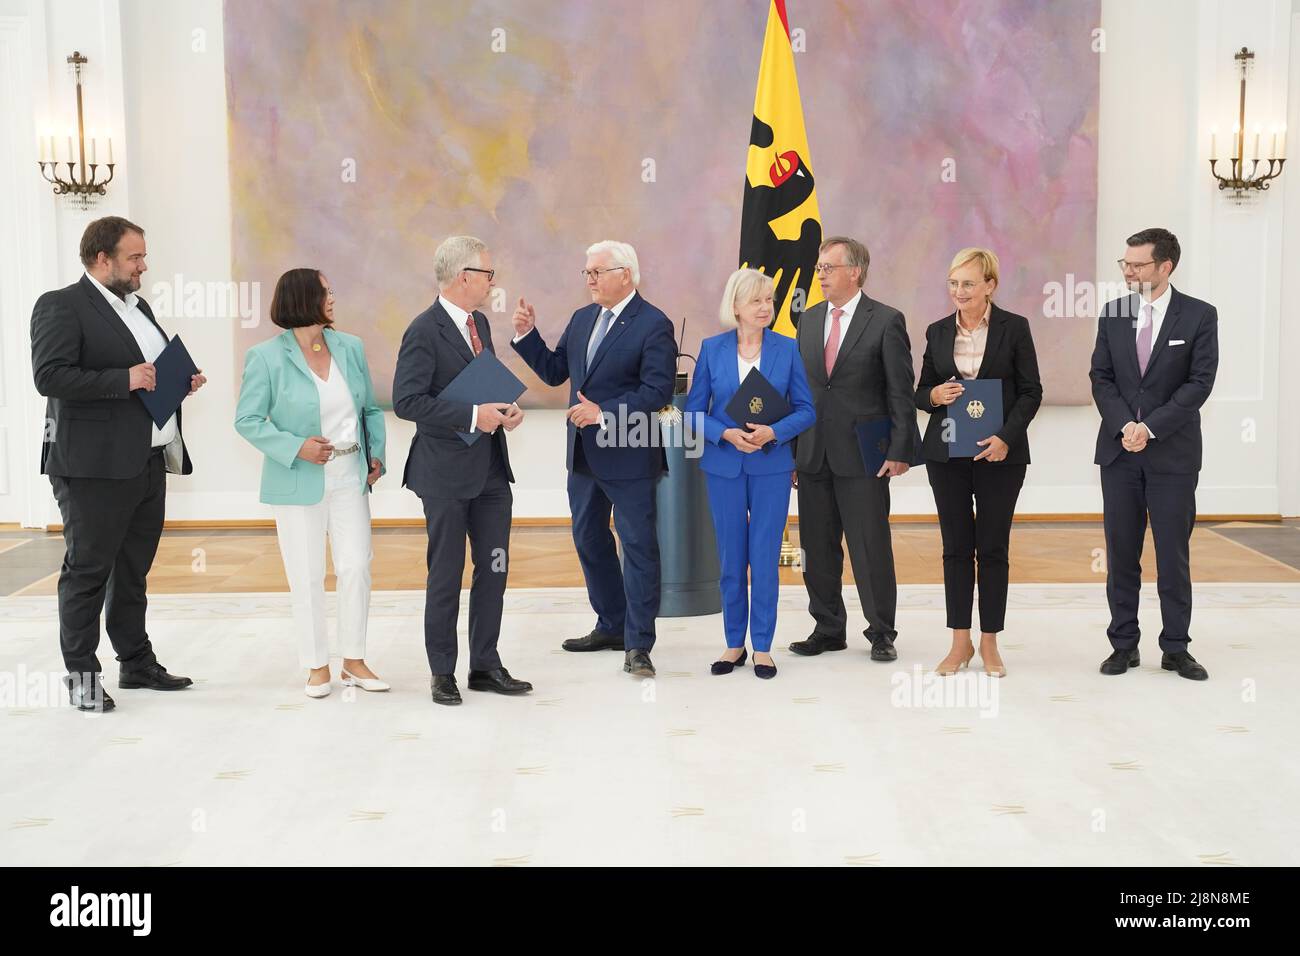 Berlin, Germany. 17th May, 2022. Federal President Frank-Walter Steinmeier (4th from right) appoints Malte Spitz (l-r), Kerstin Müller, Lutz Goebel, Gudrun Grieser, Reinhard Göhner and Andrea Wicklein as new members of the National Standards Control Council in the presence of Marco Buschmann (r, FDP), Federal Minister of Justice, at Bellevue Palace. As an independent advisory body, the National Standards Control Council monitors the German government's efforts to reduce bureaucracy and provides support for better regulation. Credit: Joerg Carstensen/dpa/Alamy Live News Stock Photo